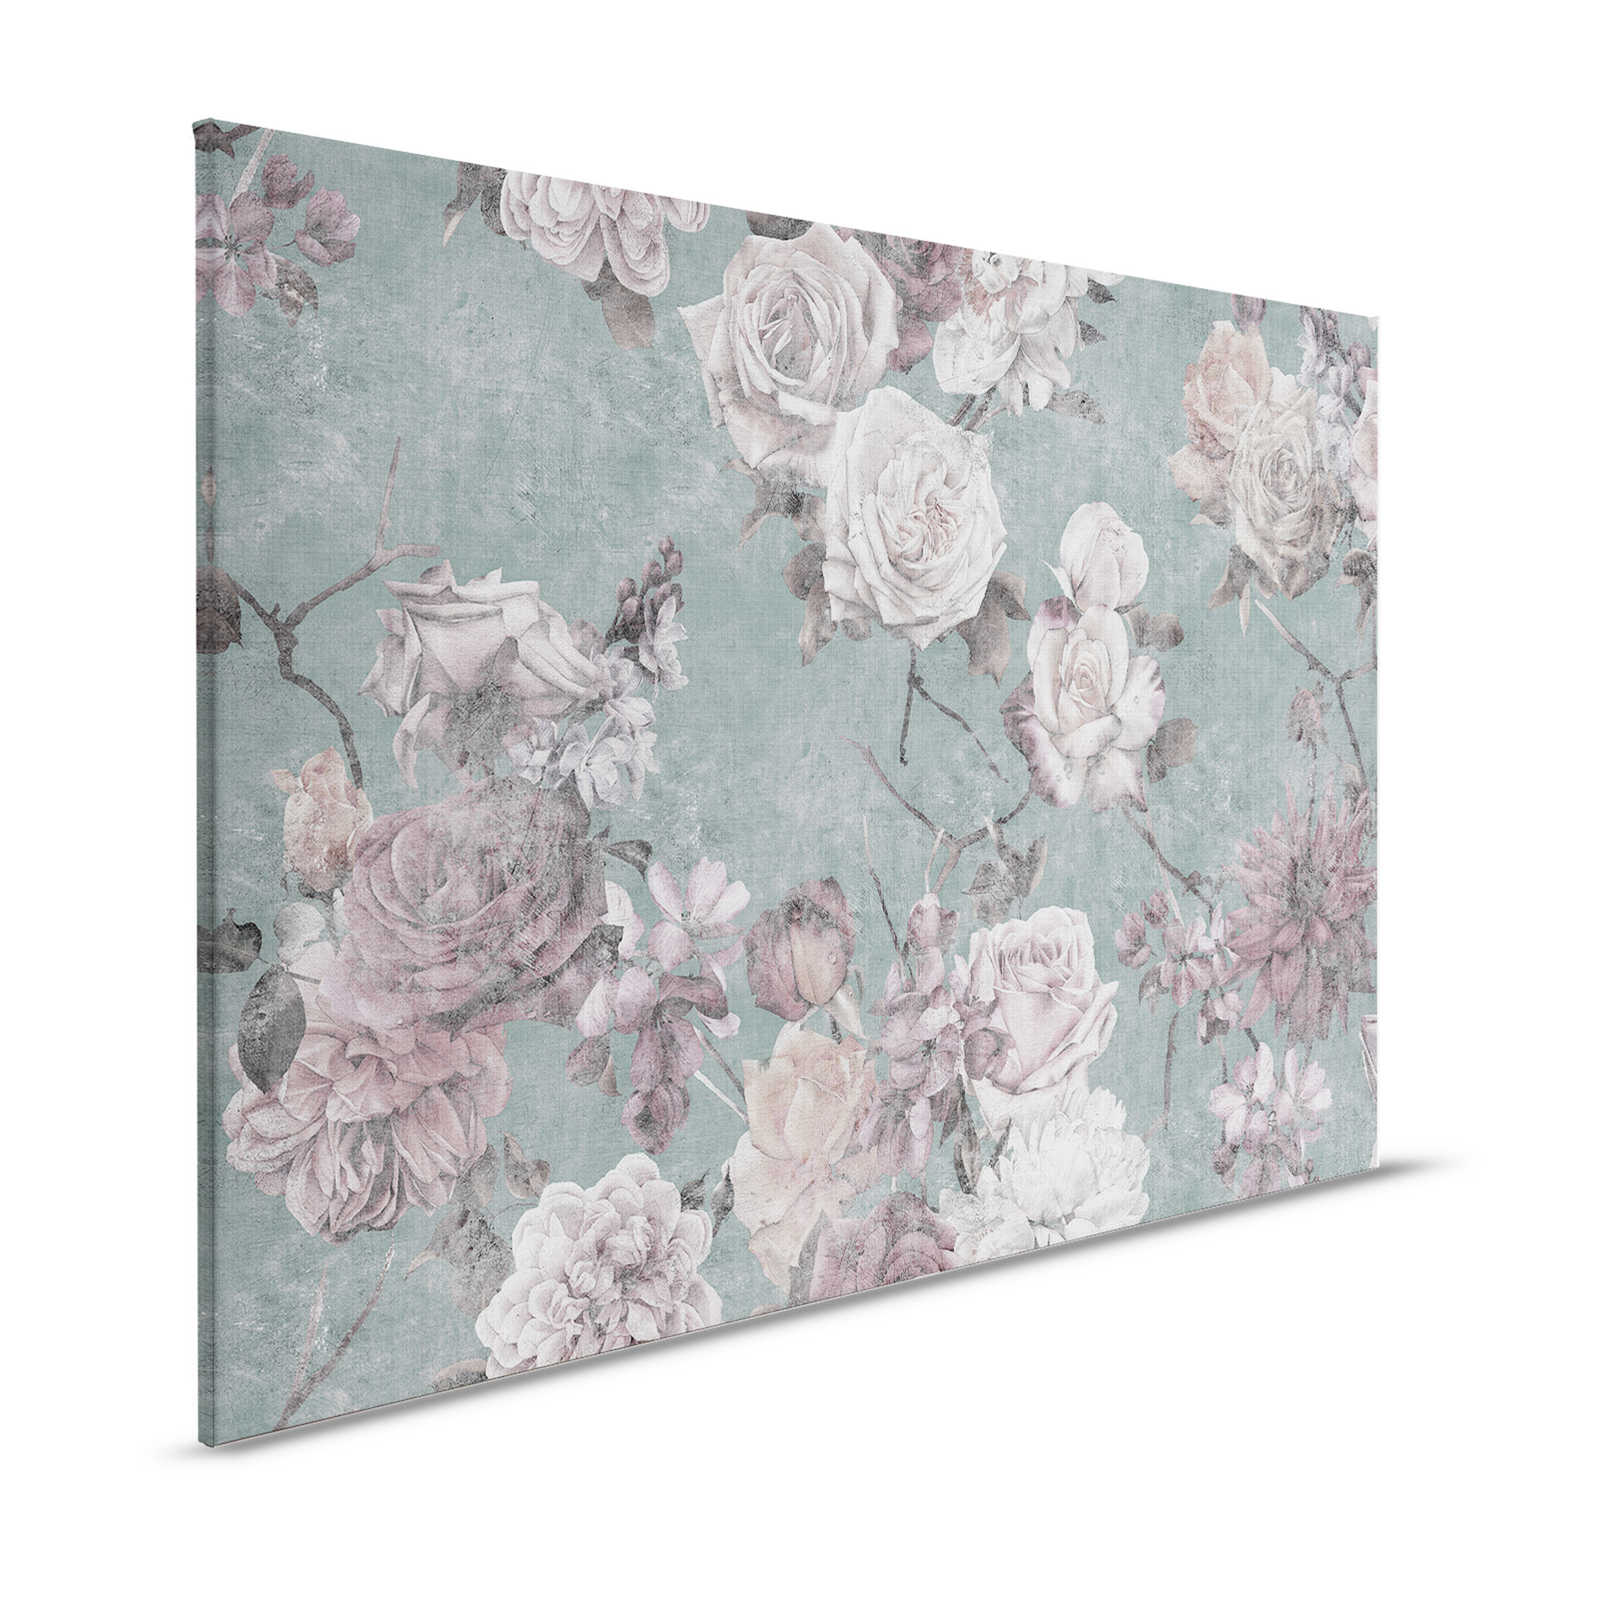 Sleeping Beauty 2 - Vintage Style Rose Petals Canvas Painting - 1.20 m x 0.80 m
